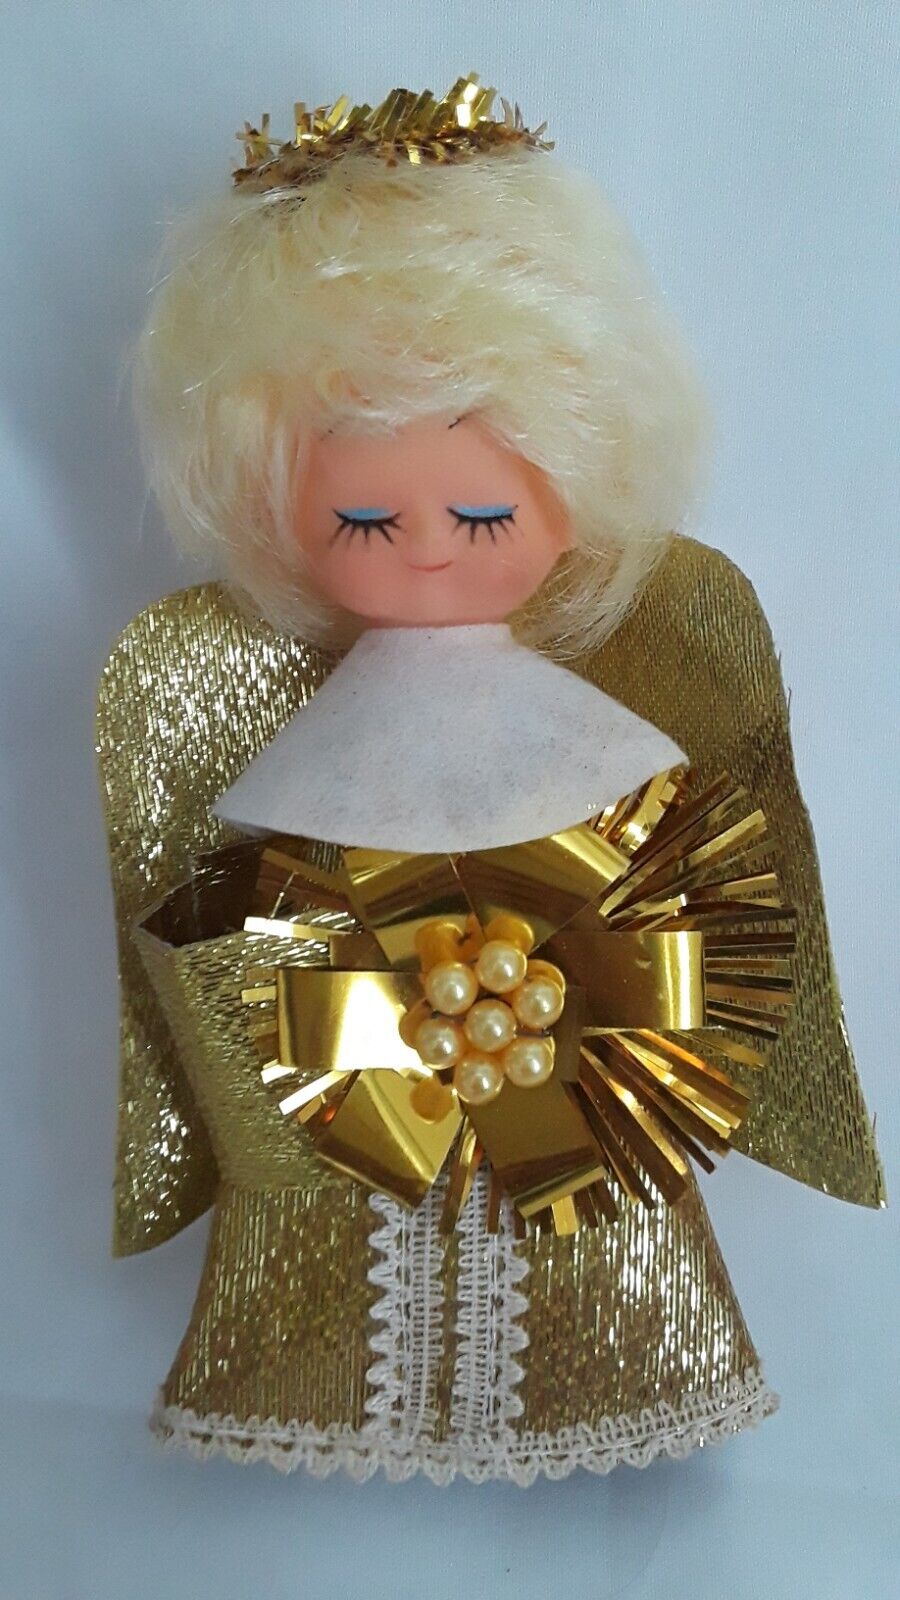 NOS GOLD ADORNED KITSCHY ANGEL VTG CHRISTMAS TREE TOPPER Tie On or Craft With 